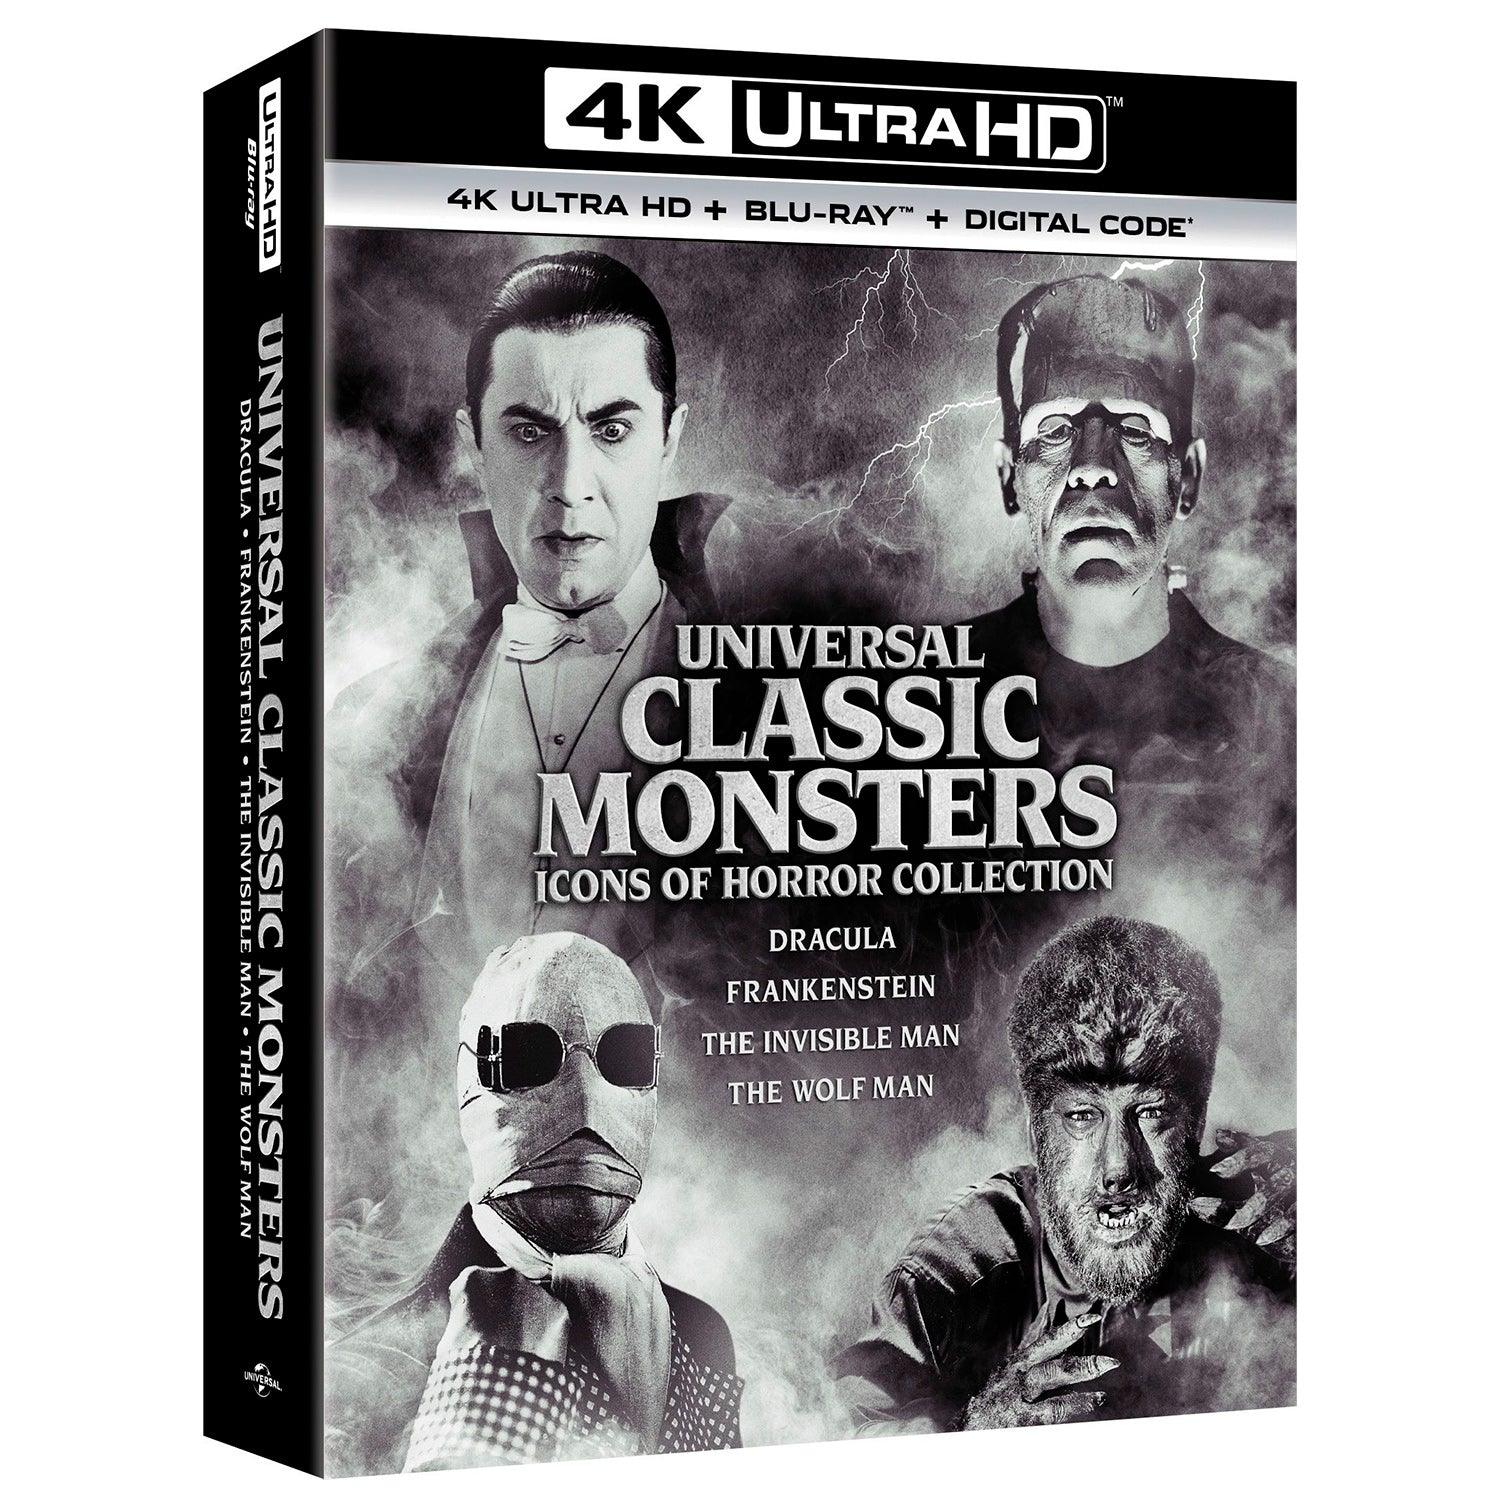 Universal Classic Monsters Icons of Horror Collection (англ. язык) (4K UHD + Blu-ray)